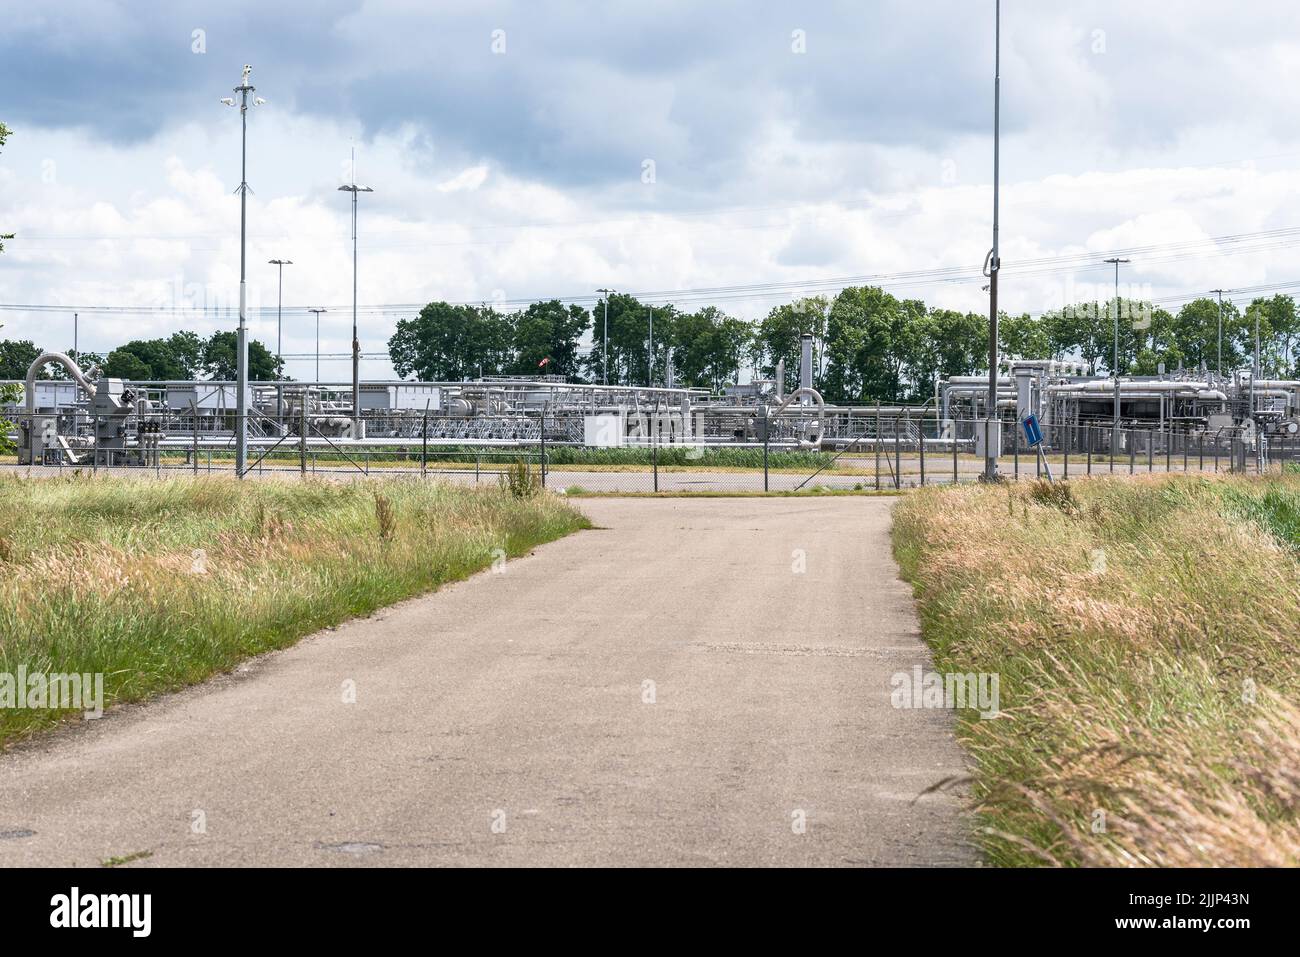 Wellheads, pipelines and valves at a natural gas extraction site part of Groningen gas field on a cloudy summer day Stock Photo